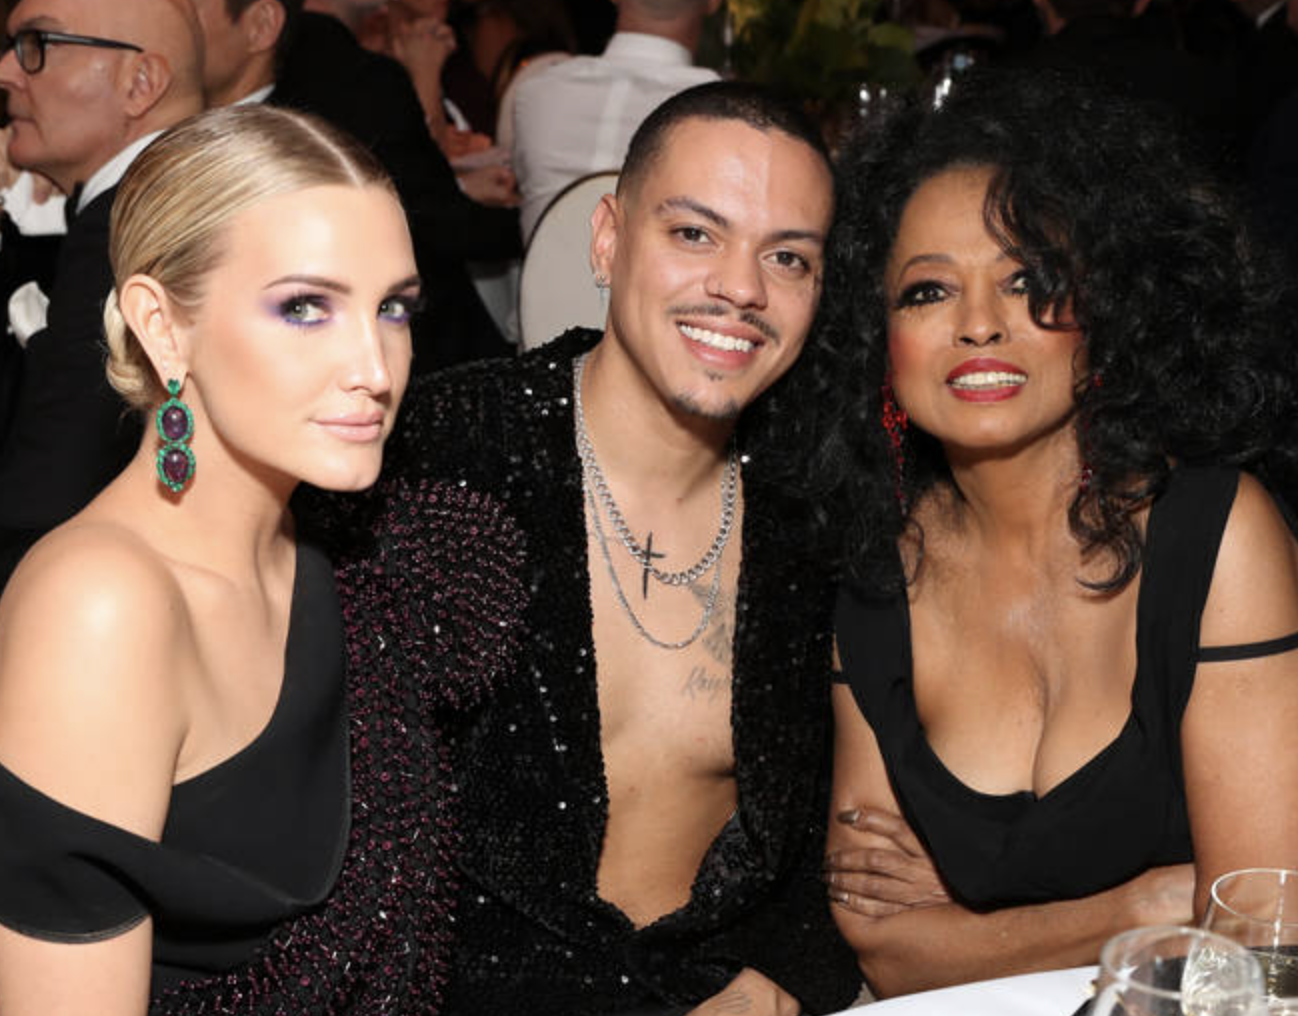 Ashlee Simpson, Evan Ross and Diana Ross